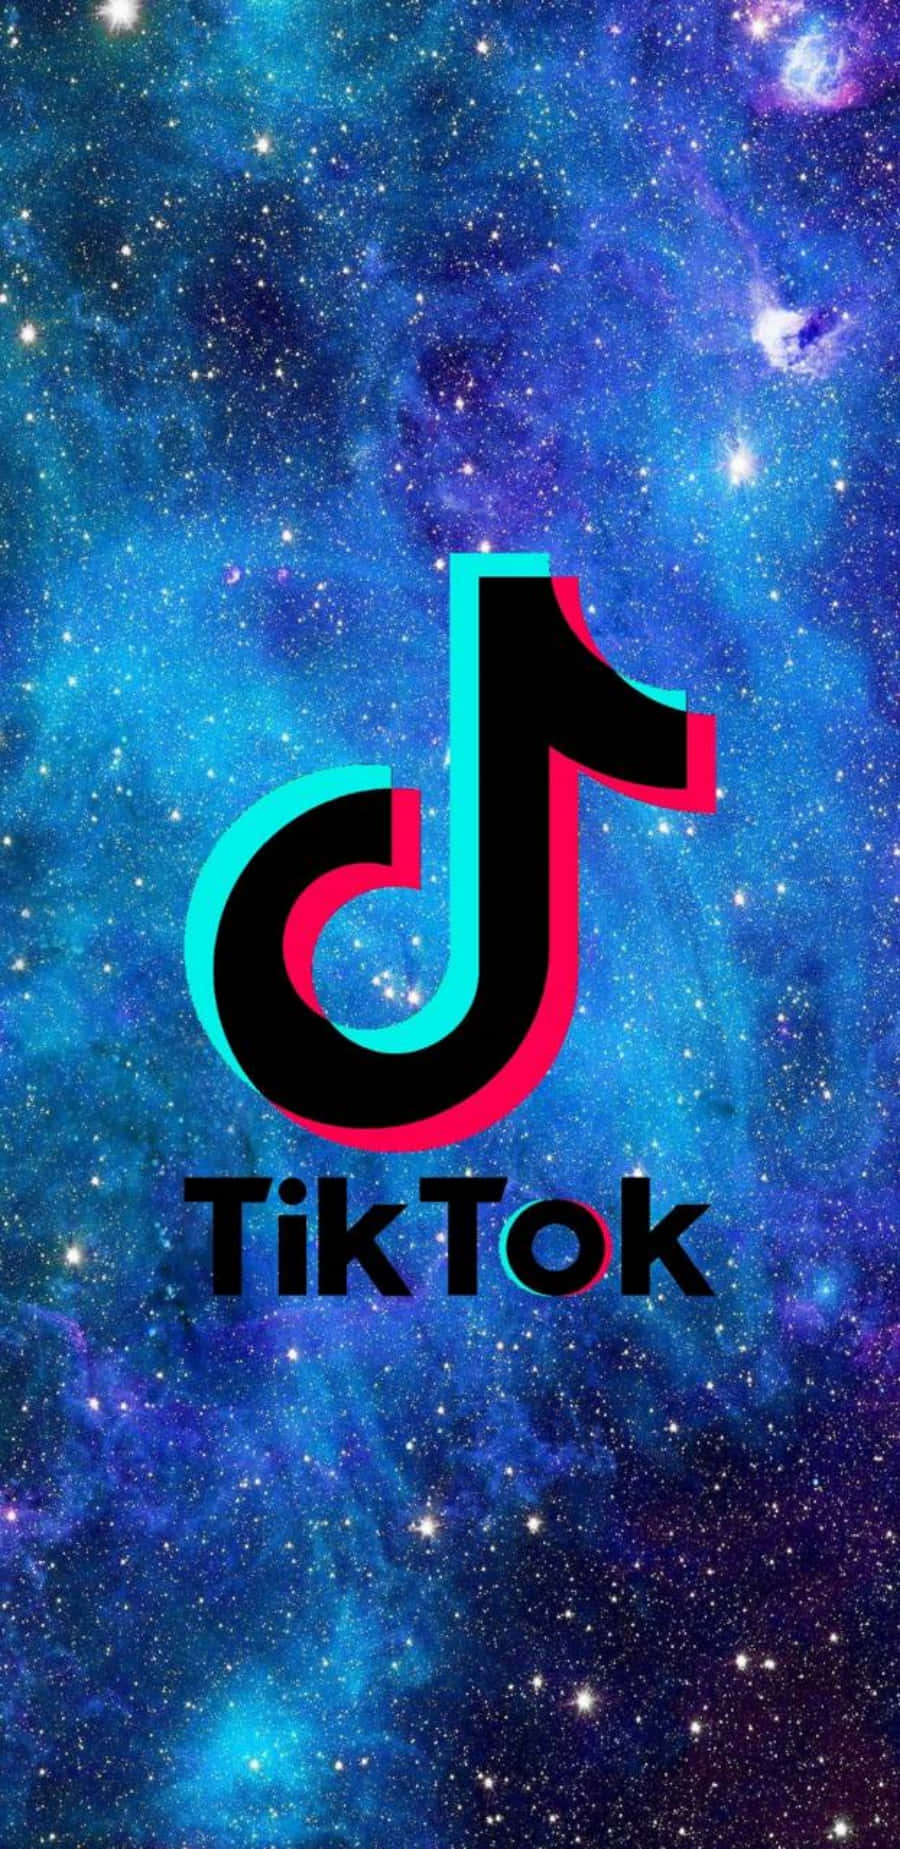 Download Tiktok Logo With A Galaxy Background | Wallpapers.com